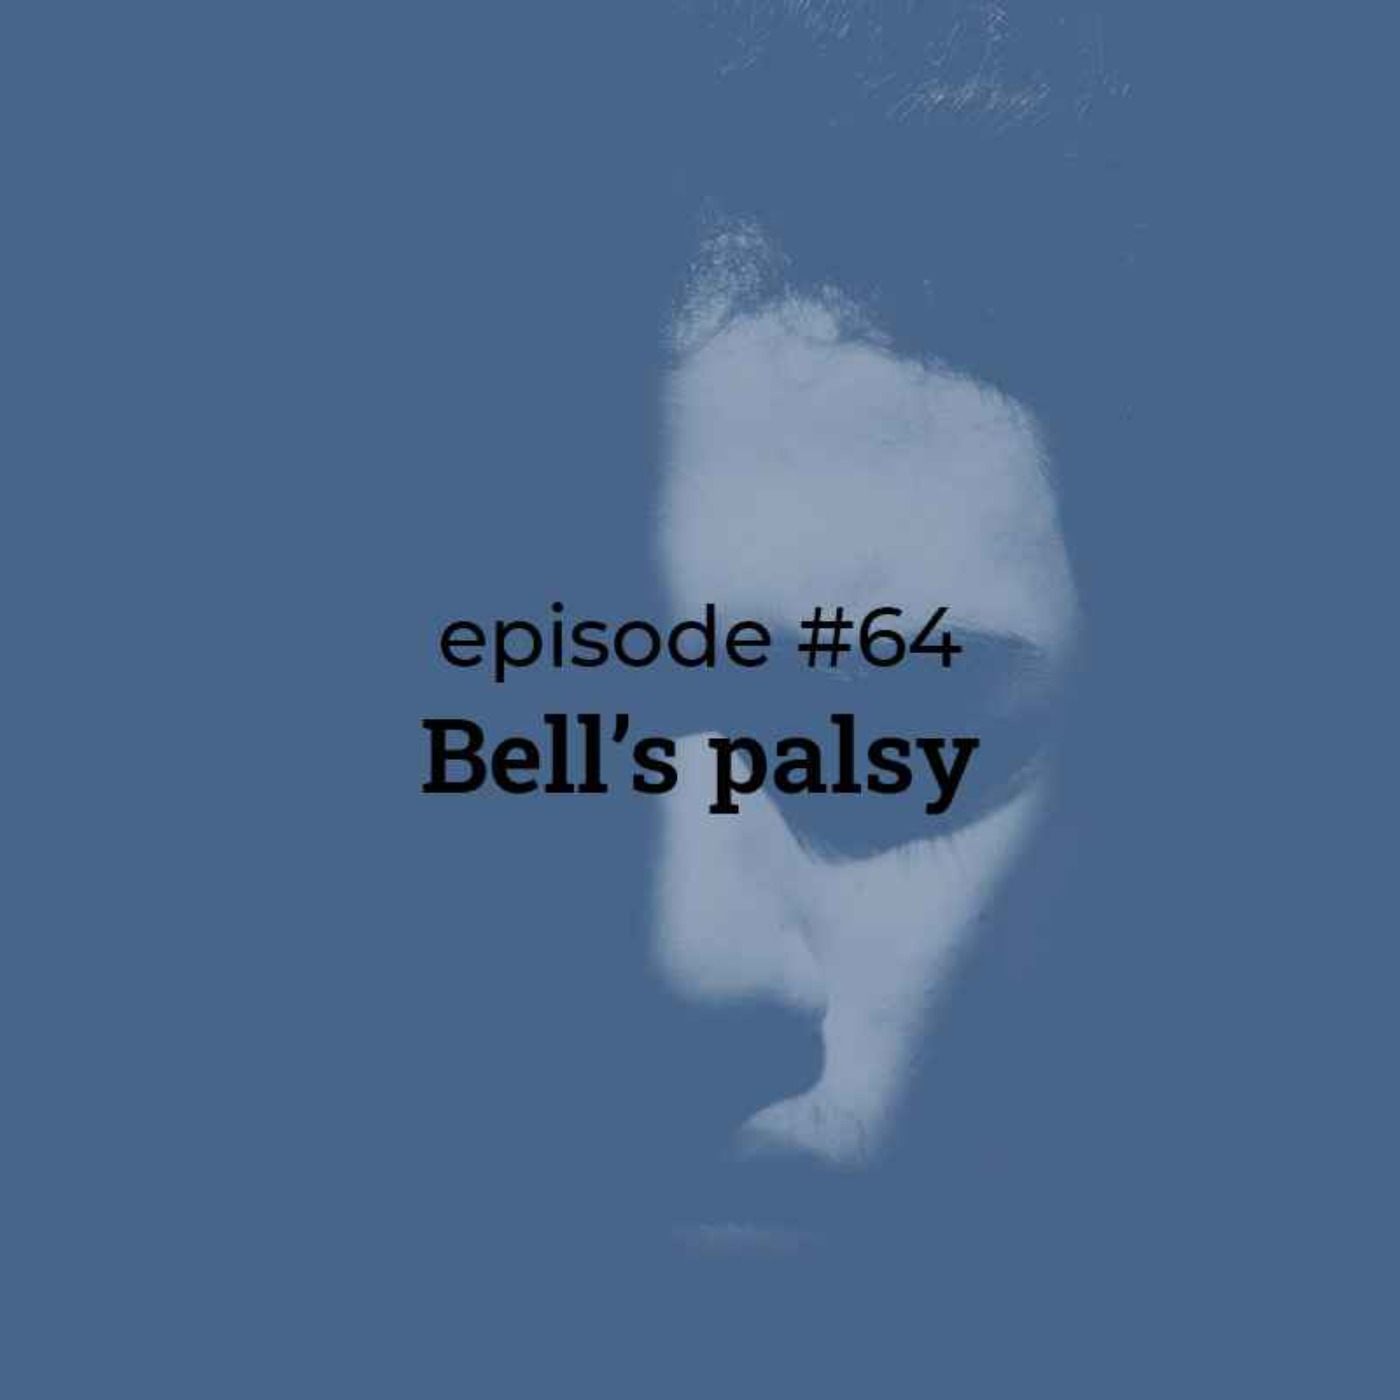 #64 Bell's palsy